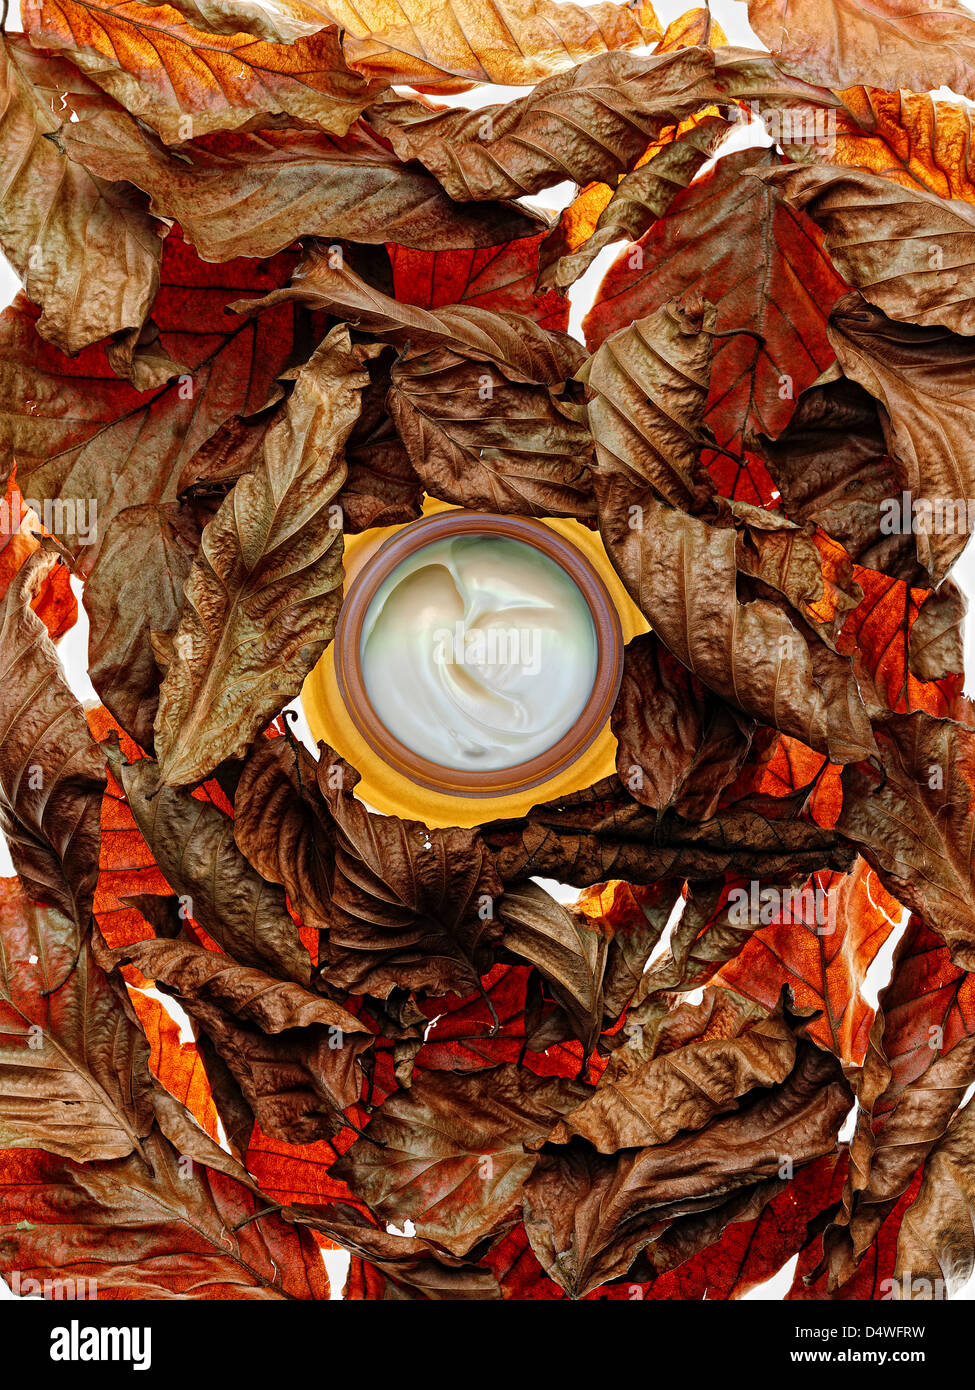 Jar of lotion in dried leaves Stock Photo